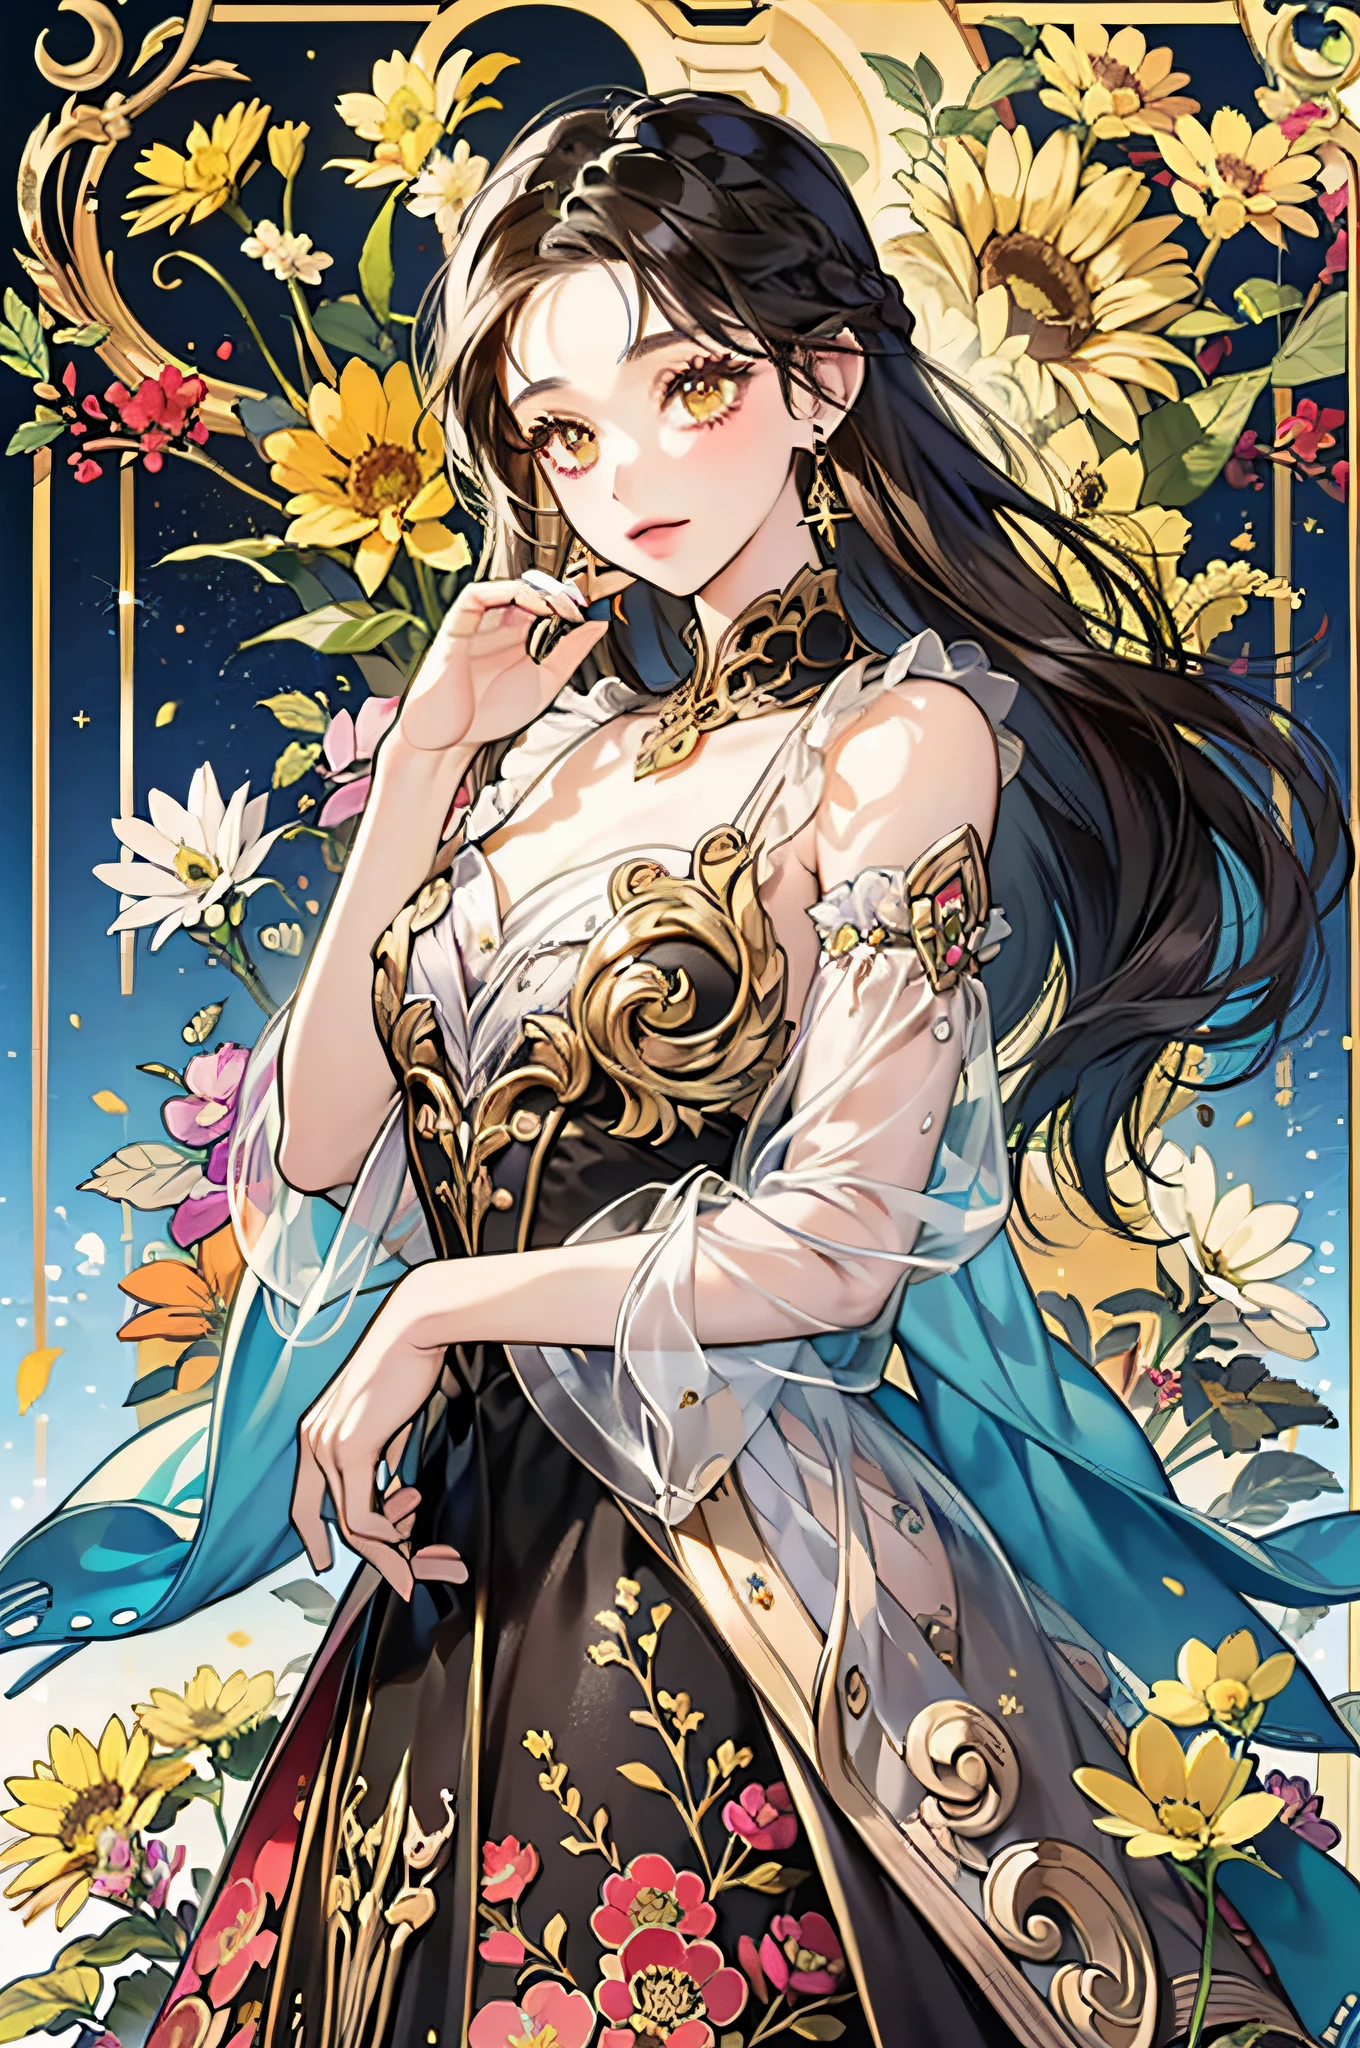 (Masterpiece, Best, Excellent, Official Art, Beautiful Aesthetics: 1.2), (1girl, Mature: 1.3, Adult: 1.3), Long Hair, Brown Hair, Braided Side Hair, Very Meticulous,, (Fractal Art: 1.1), (Color: 1.4) (Flowers: 1.3), Most Detailed, (Zentangle: 1.2), (Dynamic Pose), (Abstract Background: 1.3), (Shiny Skin), (Multiple Colors: 1.4), (Earrings:1.4) , (feathers: 1.4), Golden Eyes, Yellow Chrysanthemum, Golden Eyes